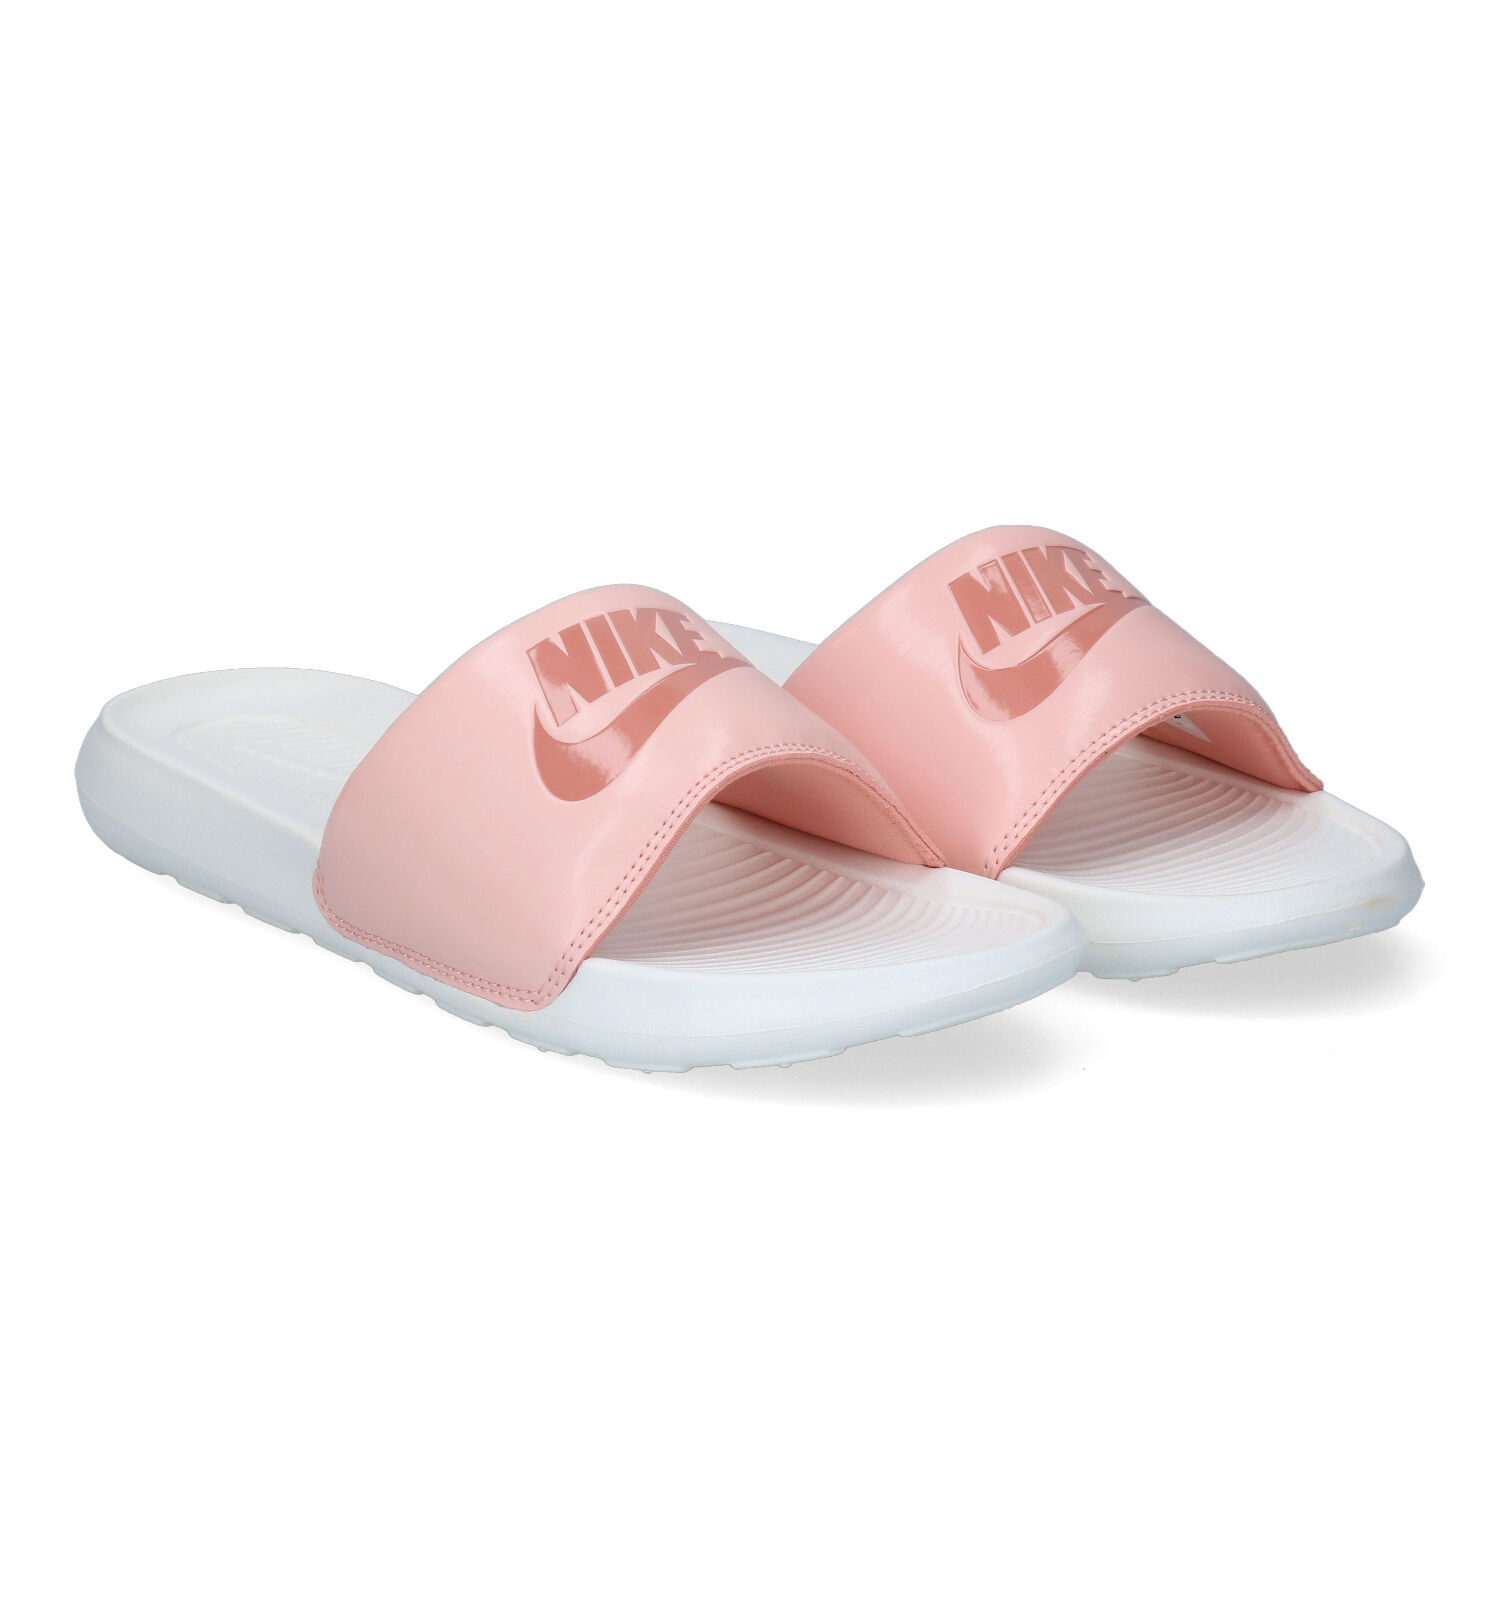 mad selvmord Maladroit Nike Victori One Roze Badslippers | Dames Slippers